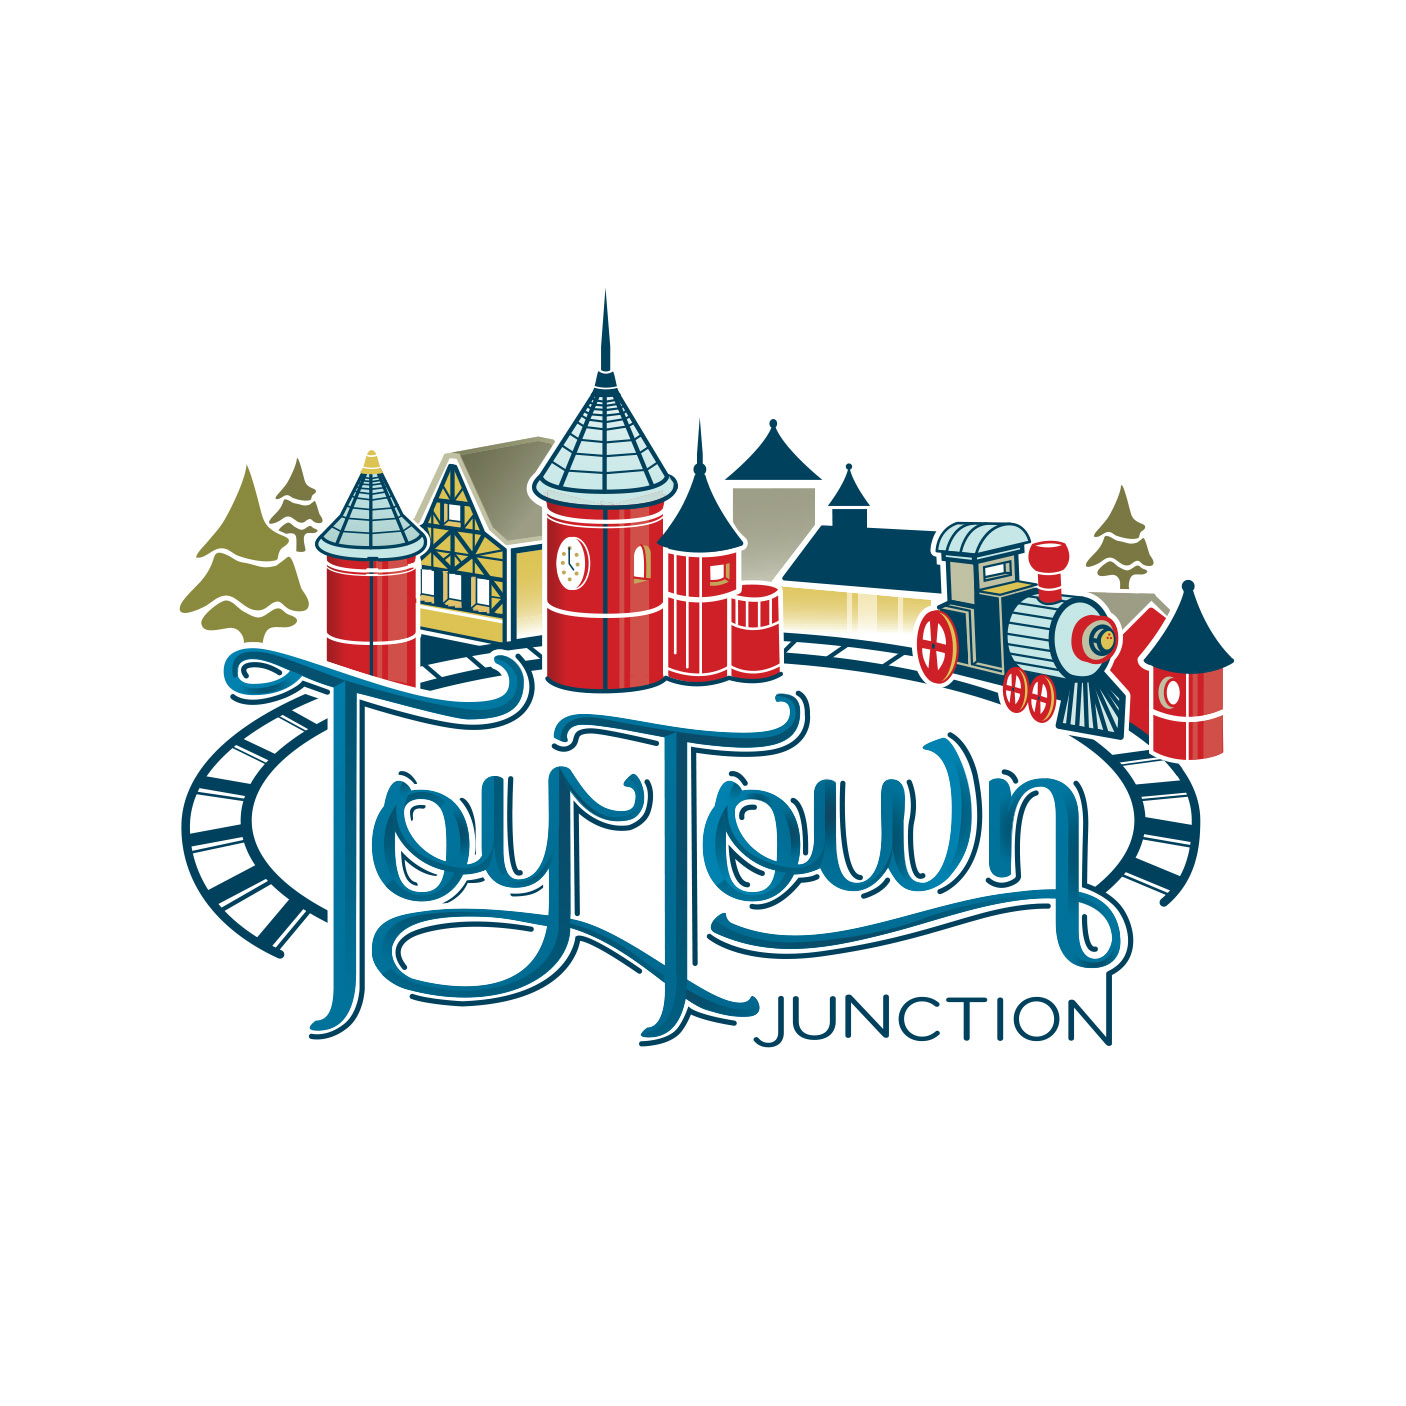 Branding, lettering, and illustration for Toy Town Junction.